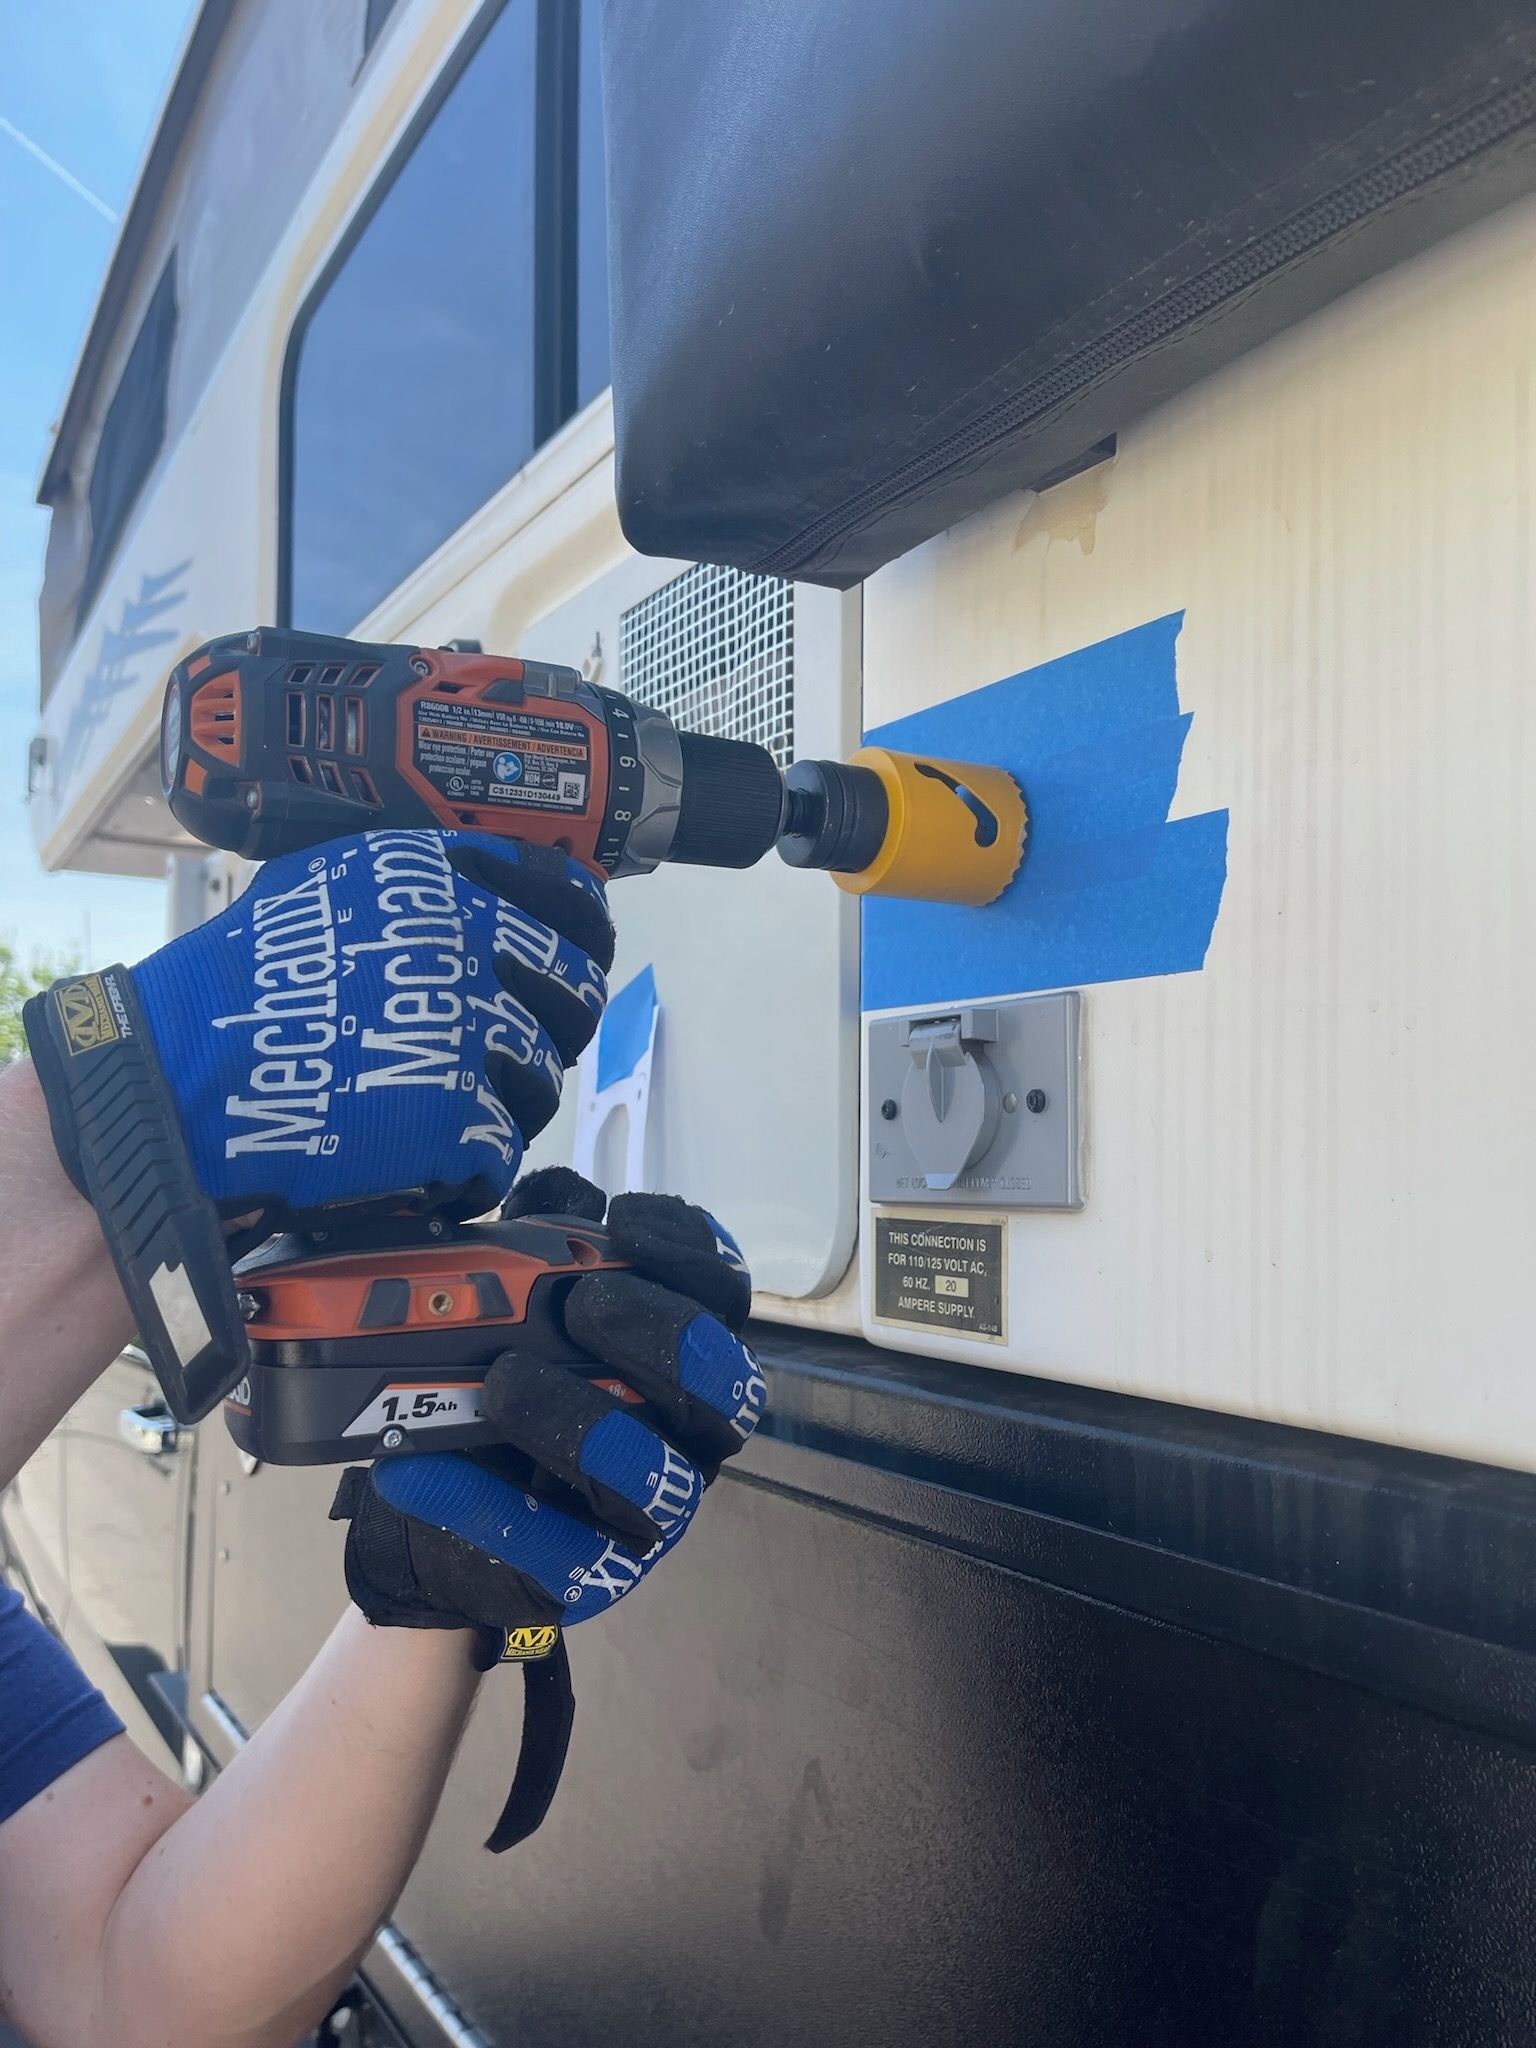 Lessons in Drilling Through Your Camper (aka installing a Starlink ethernet port)